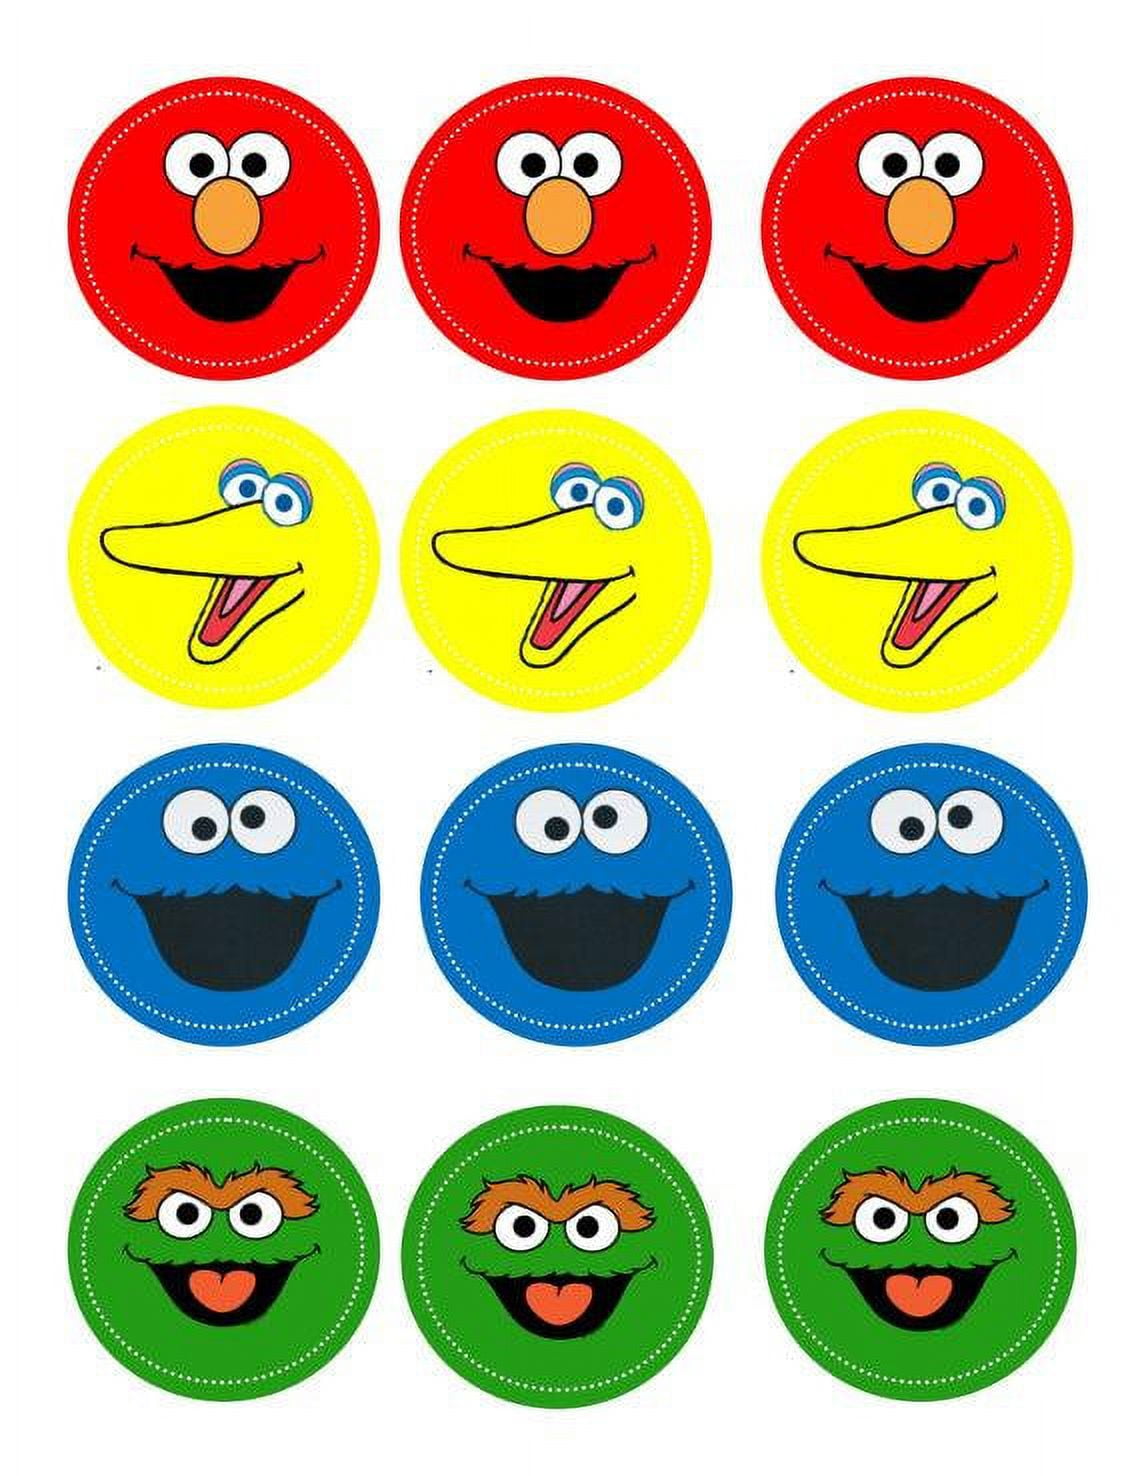 NEW! Sesame Street Cookie Monsters 1st Birthday party supplies 